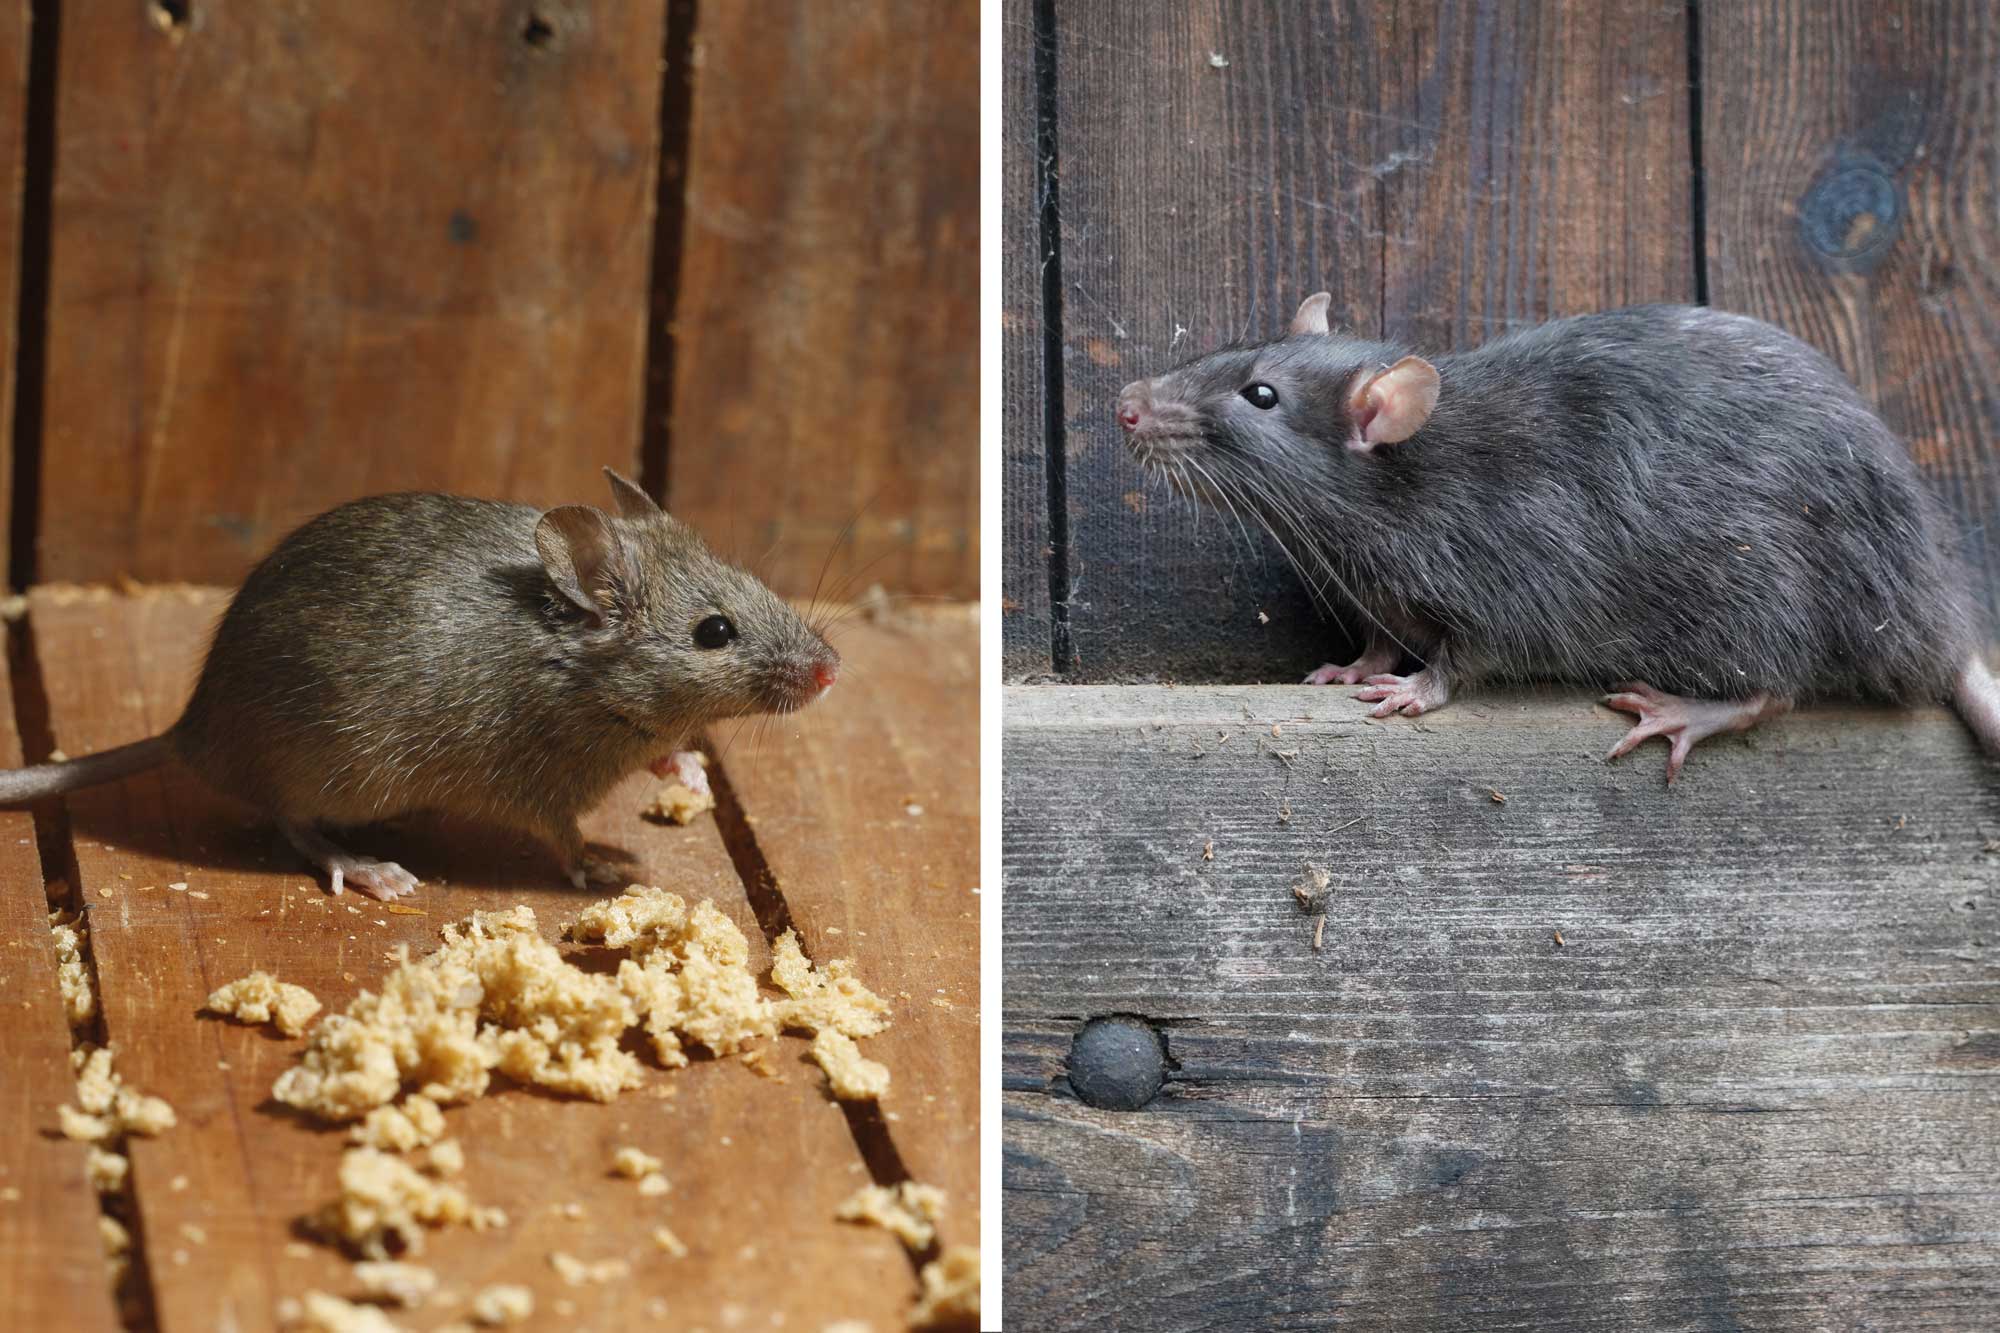 What's the difference?: Mouse vs. rat